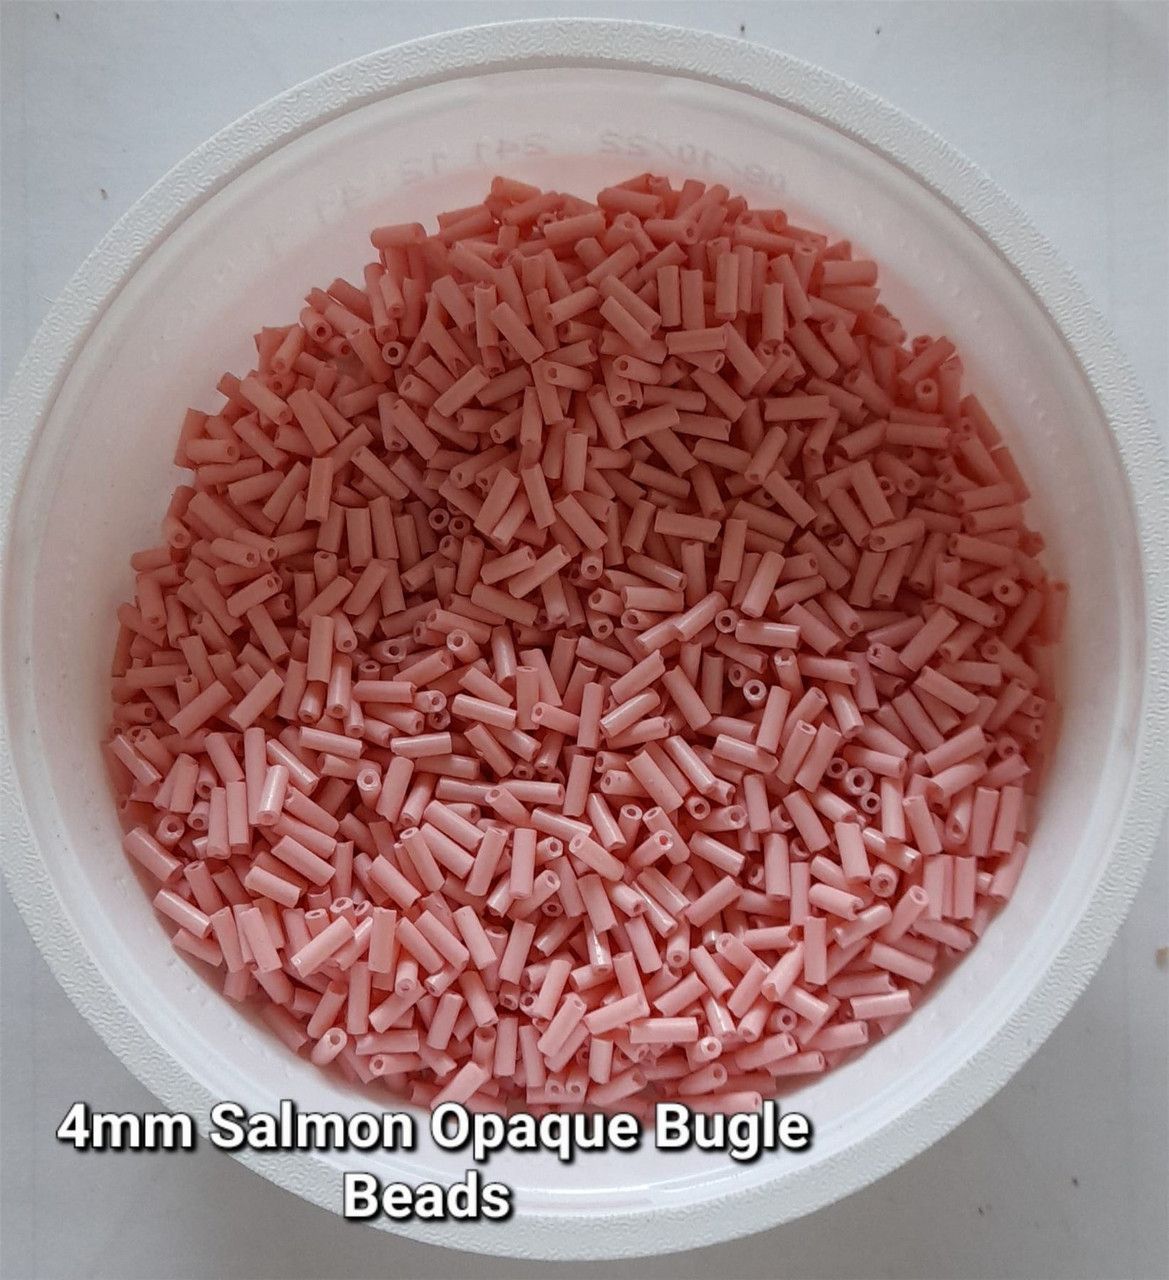 50g glass bugle beads - Salmon Opaque - approx 4mm tubes